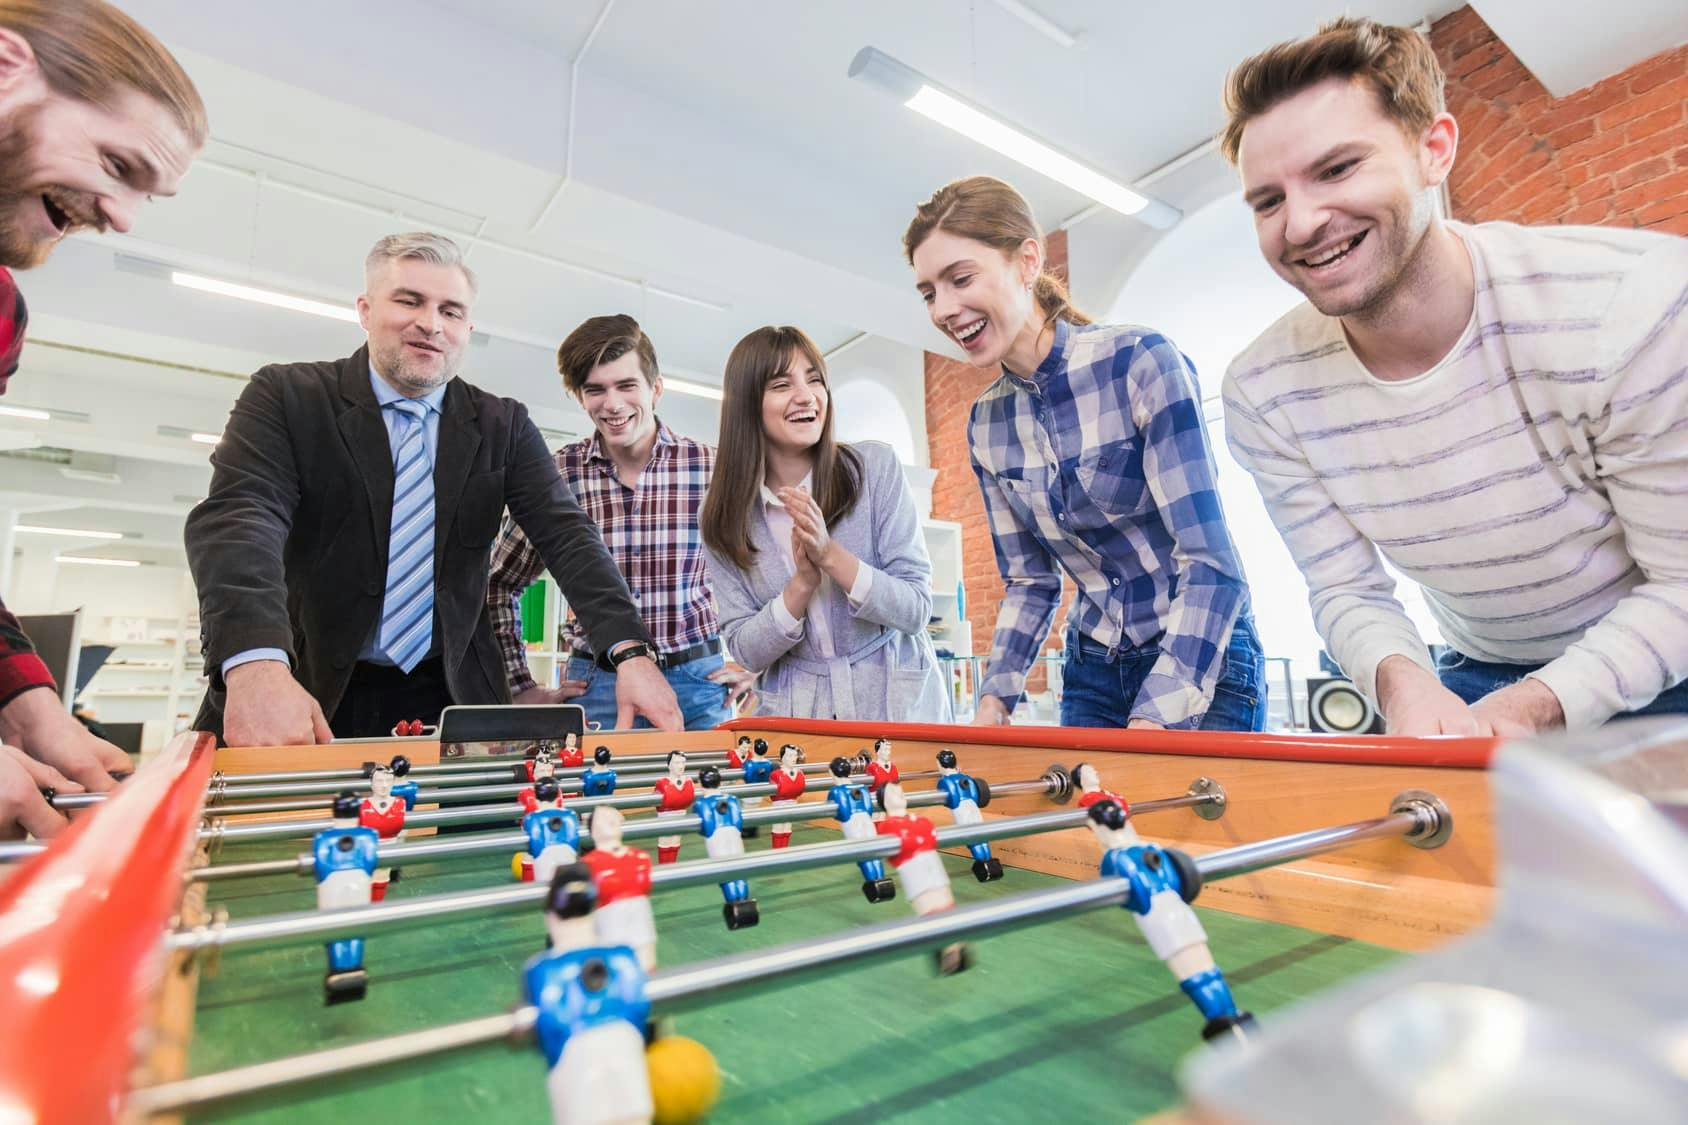 Top 15 Fun Friday Games and Ideas for Your Employees